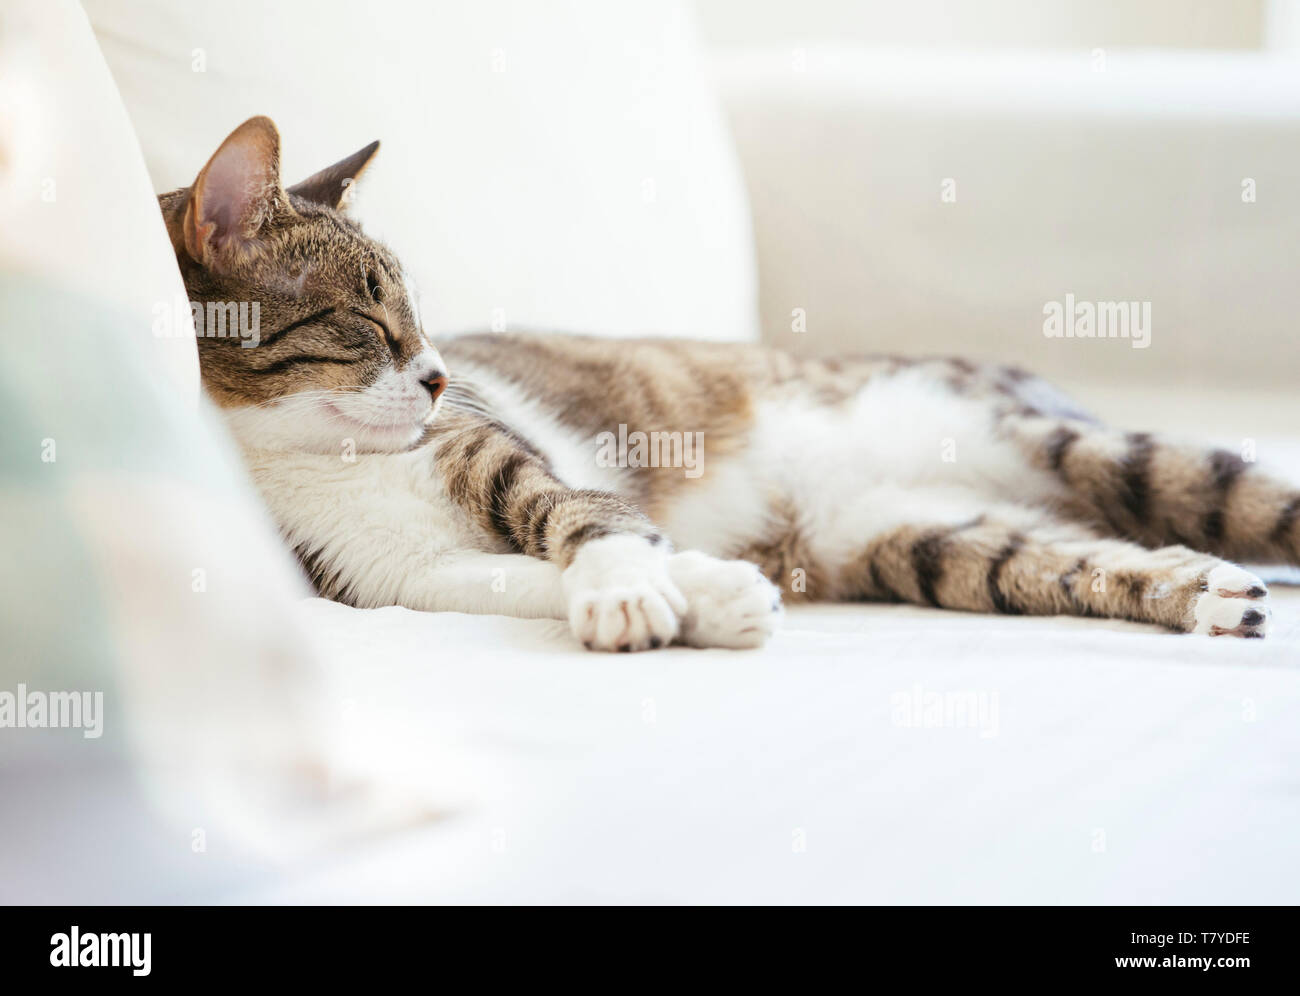 Cat sleeping on bed at home Stock Photo